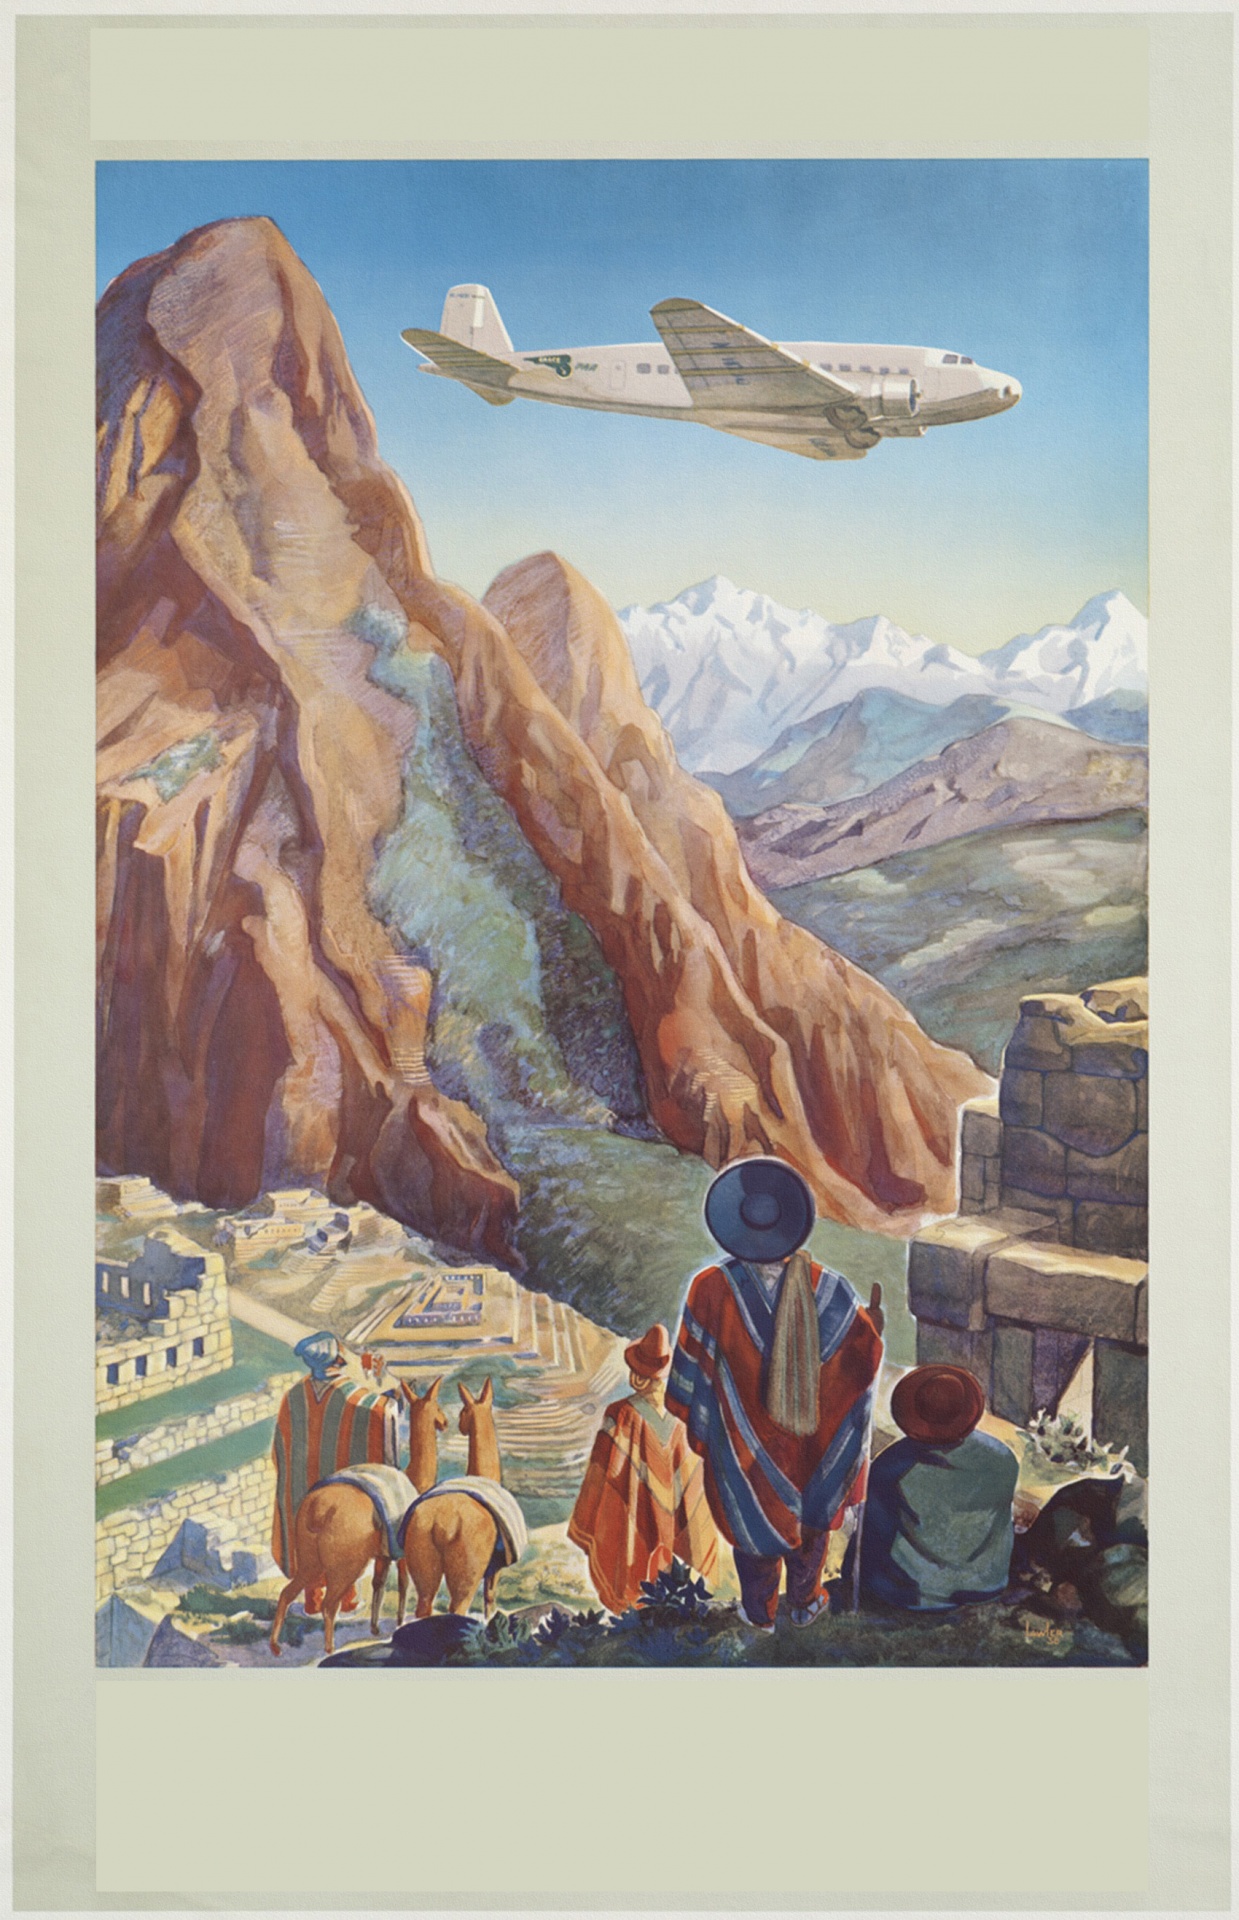 Vintage travel poster, add your own text